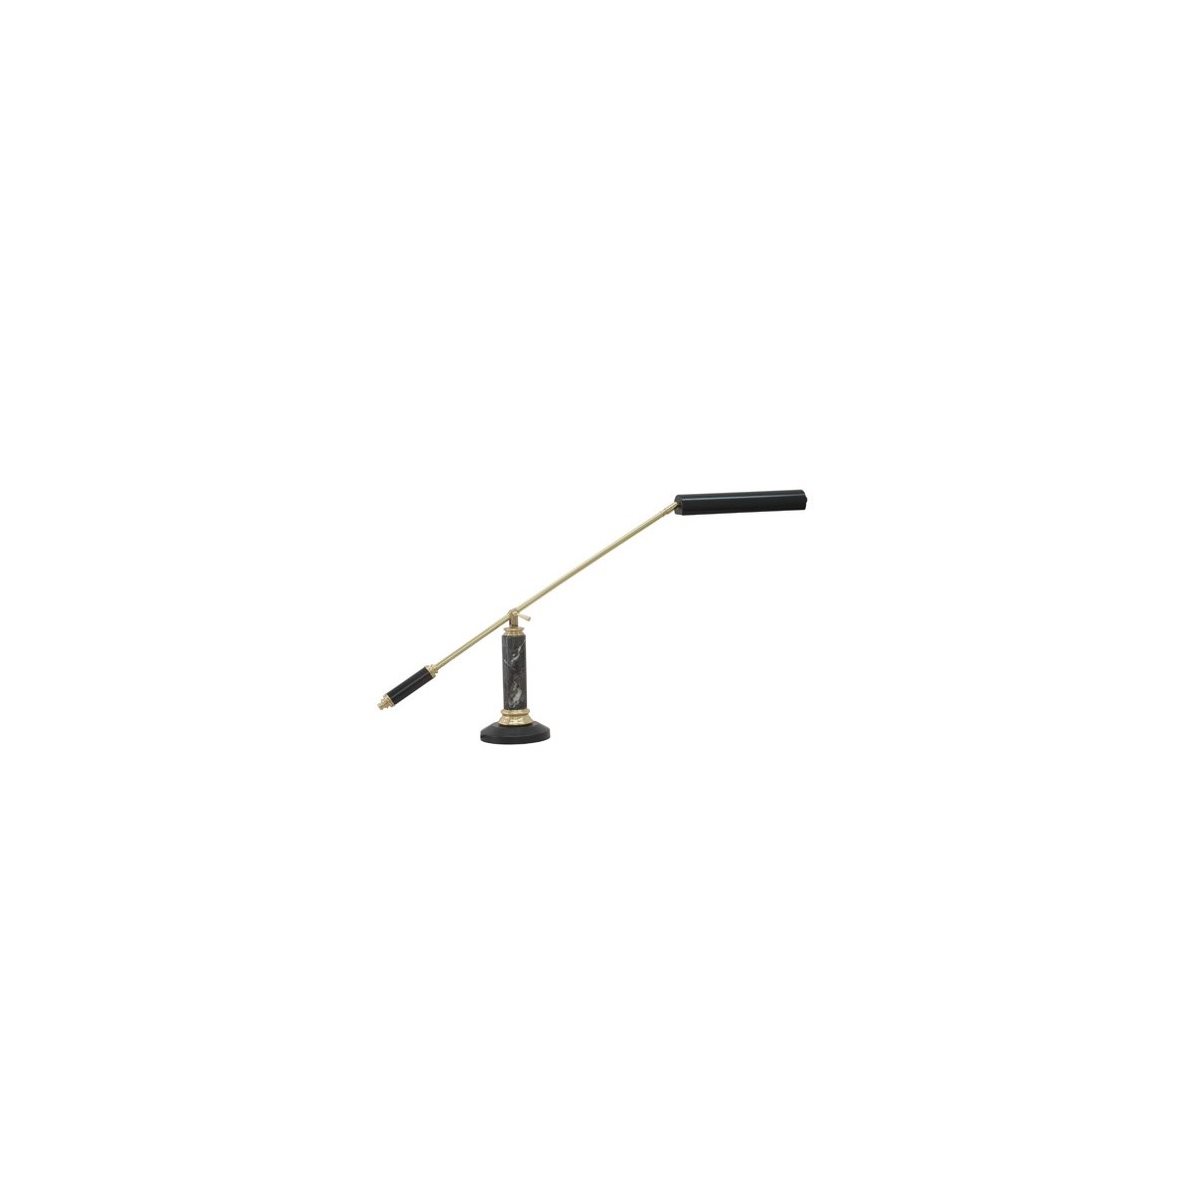 HOUSE OF TROY - PLED192-627 - Counter Balance Polished Brass and Black Marble LED Piano / Desk Lamp